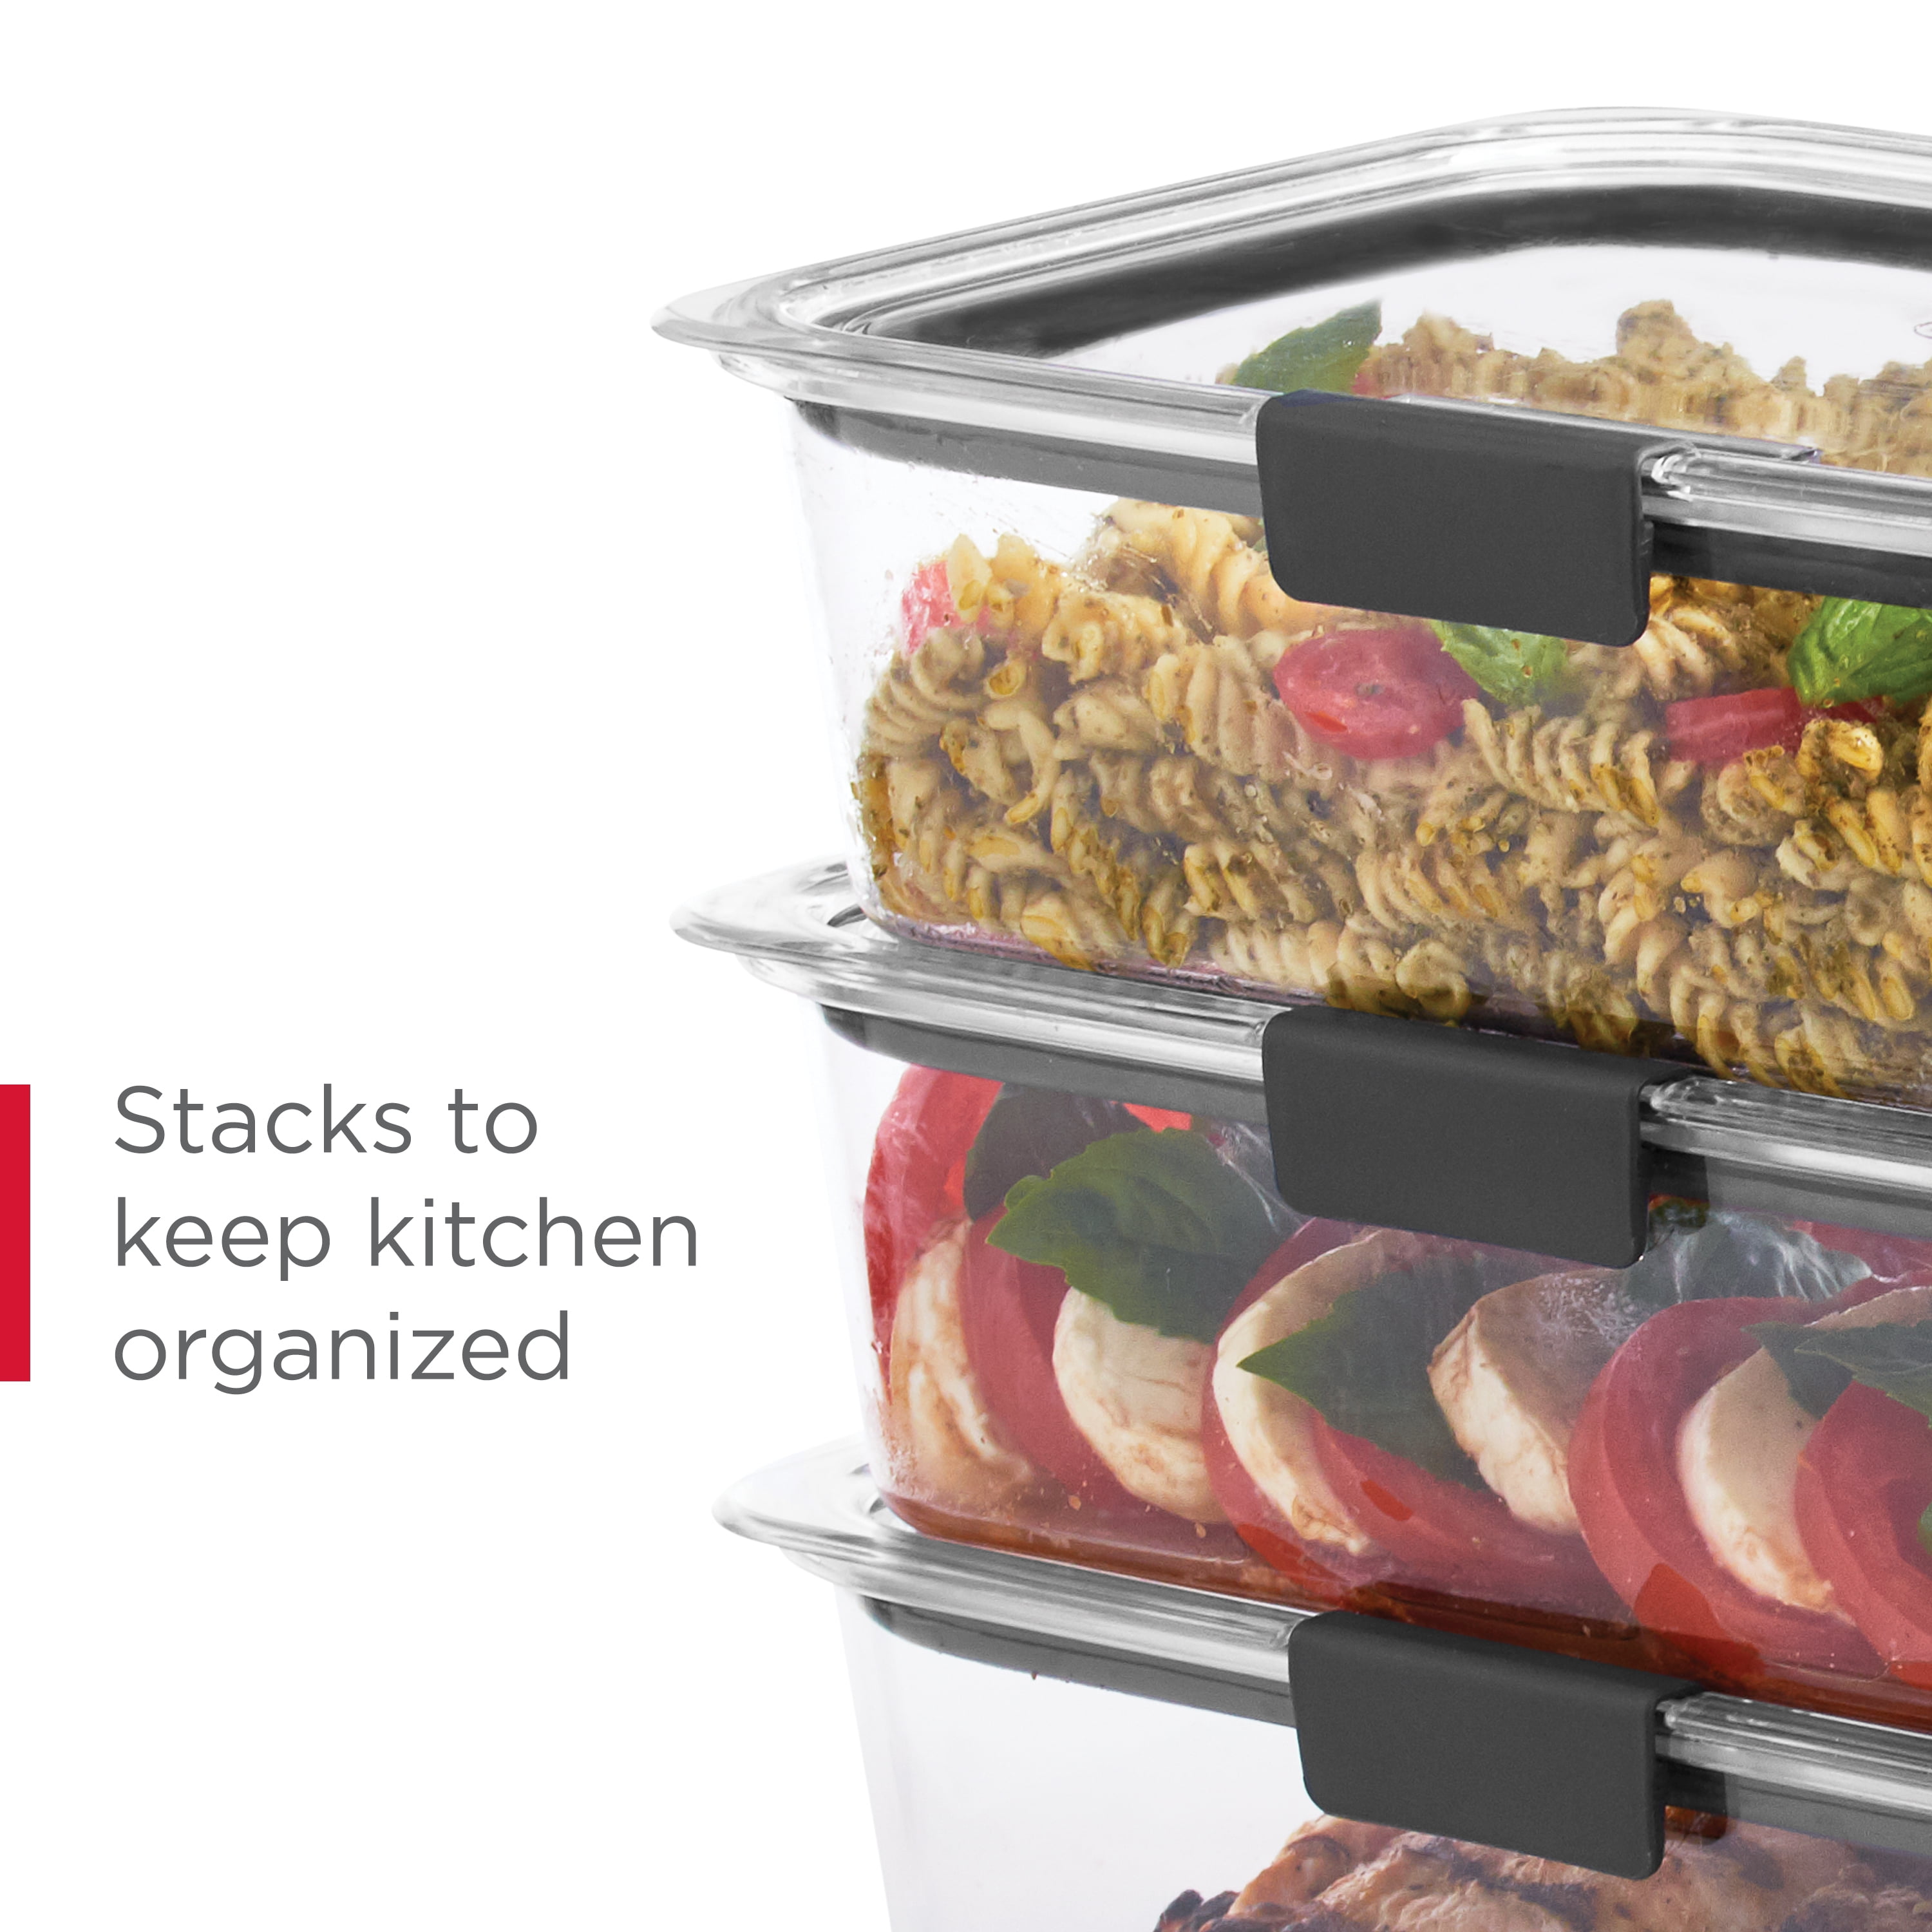 Rubbermaid Brilliance BPA Free Food Storage Containers with Lids, Airtight,  for Lunch, Meal Prep, and Leftovers, Set of 5 (1.3 Cup)